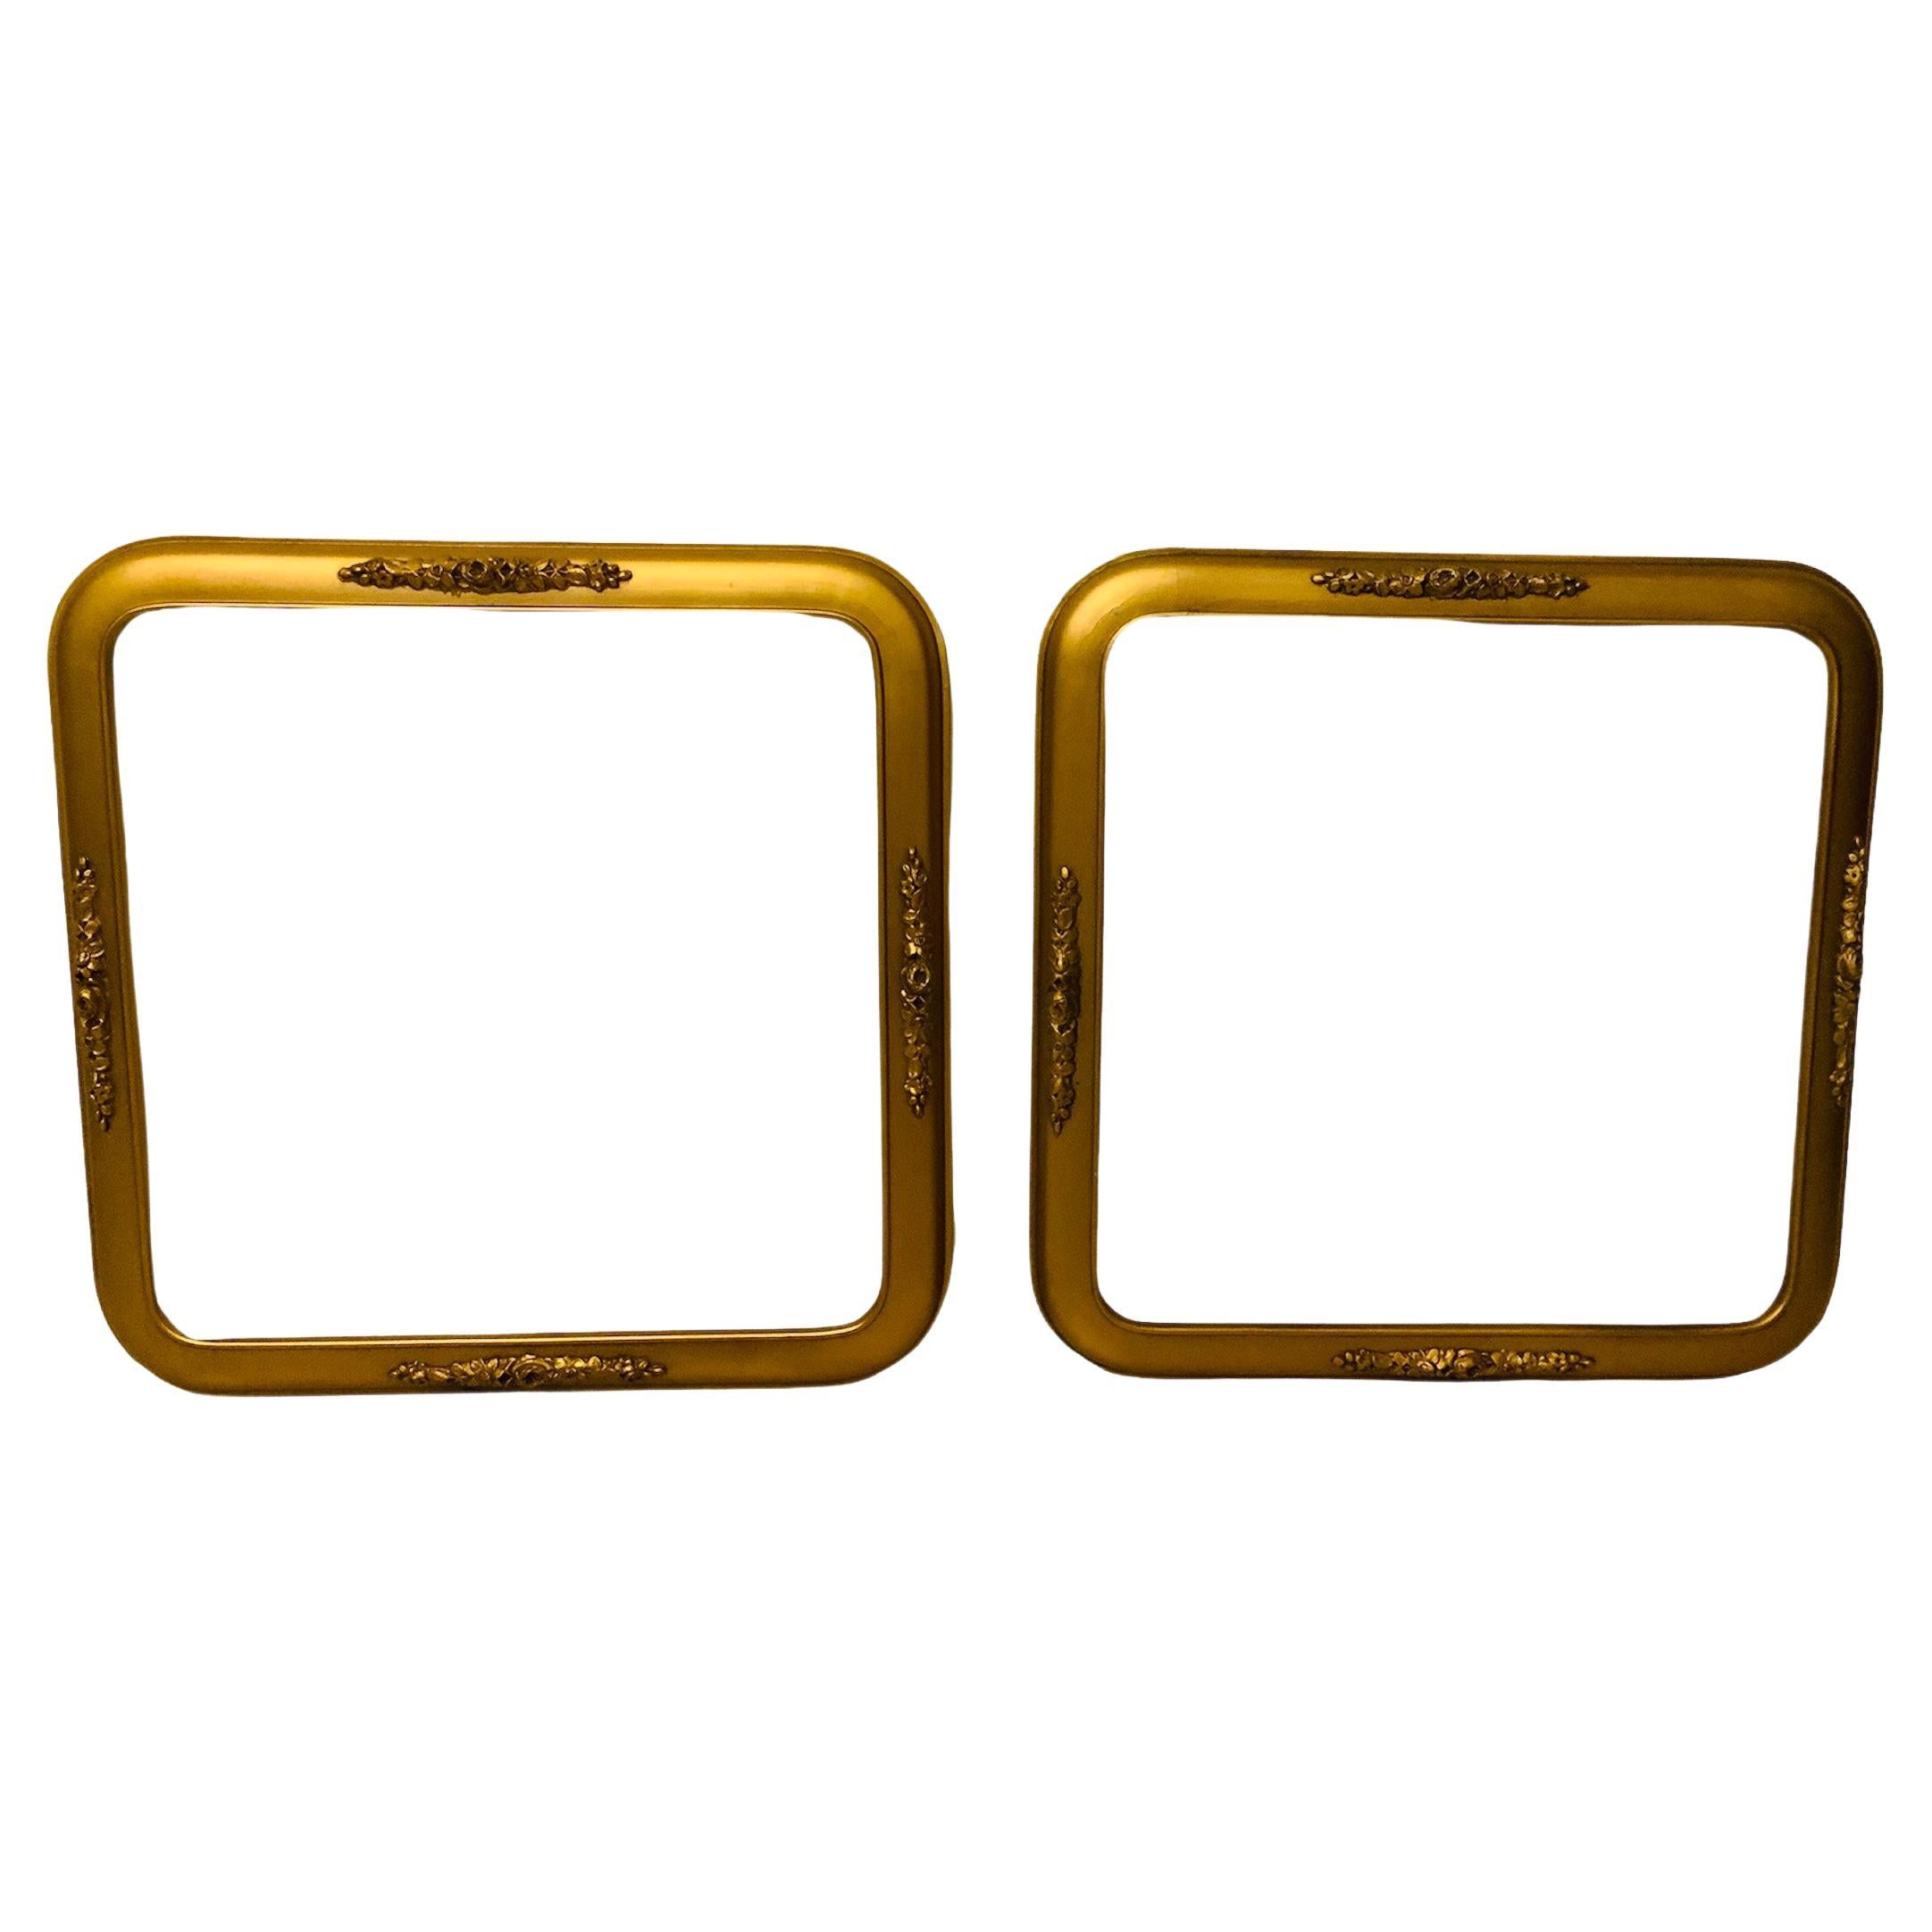 Pair of Gilt Picture/Painting Frames